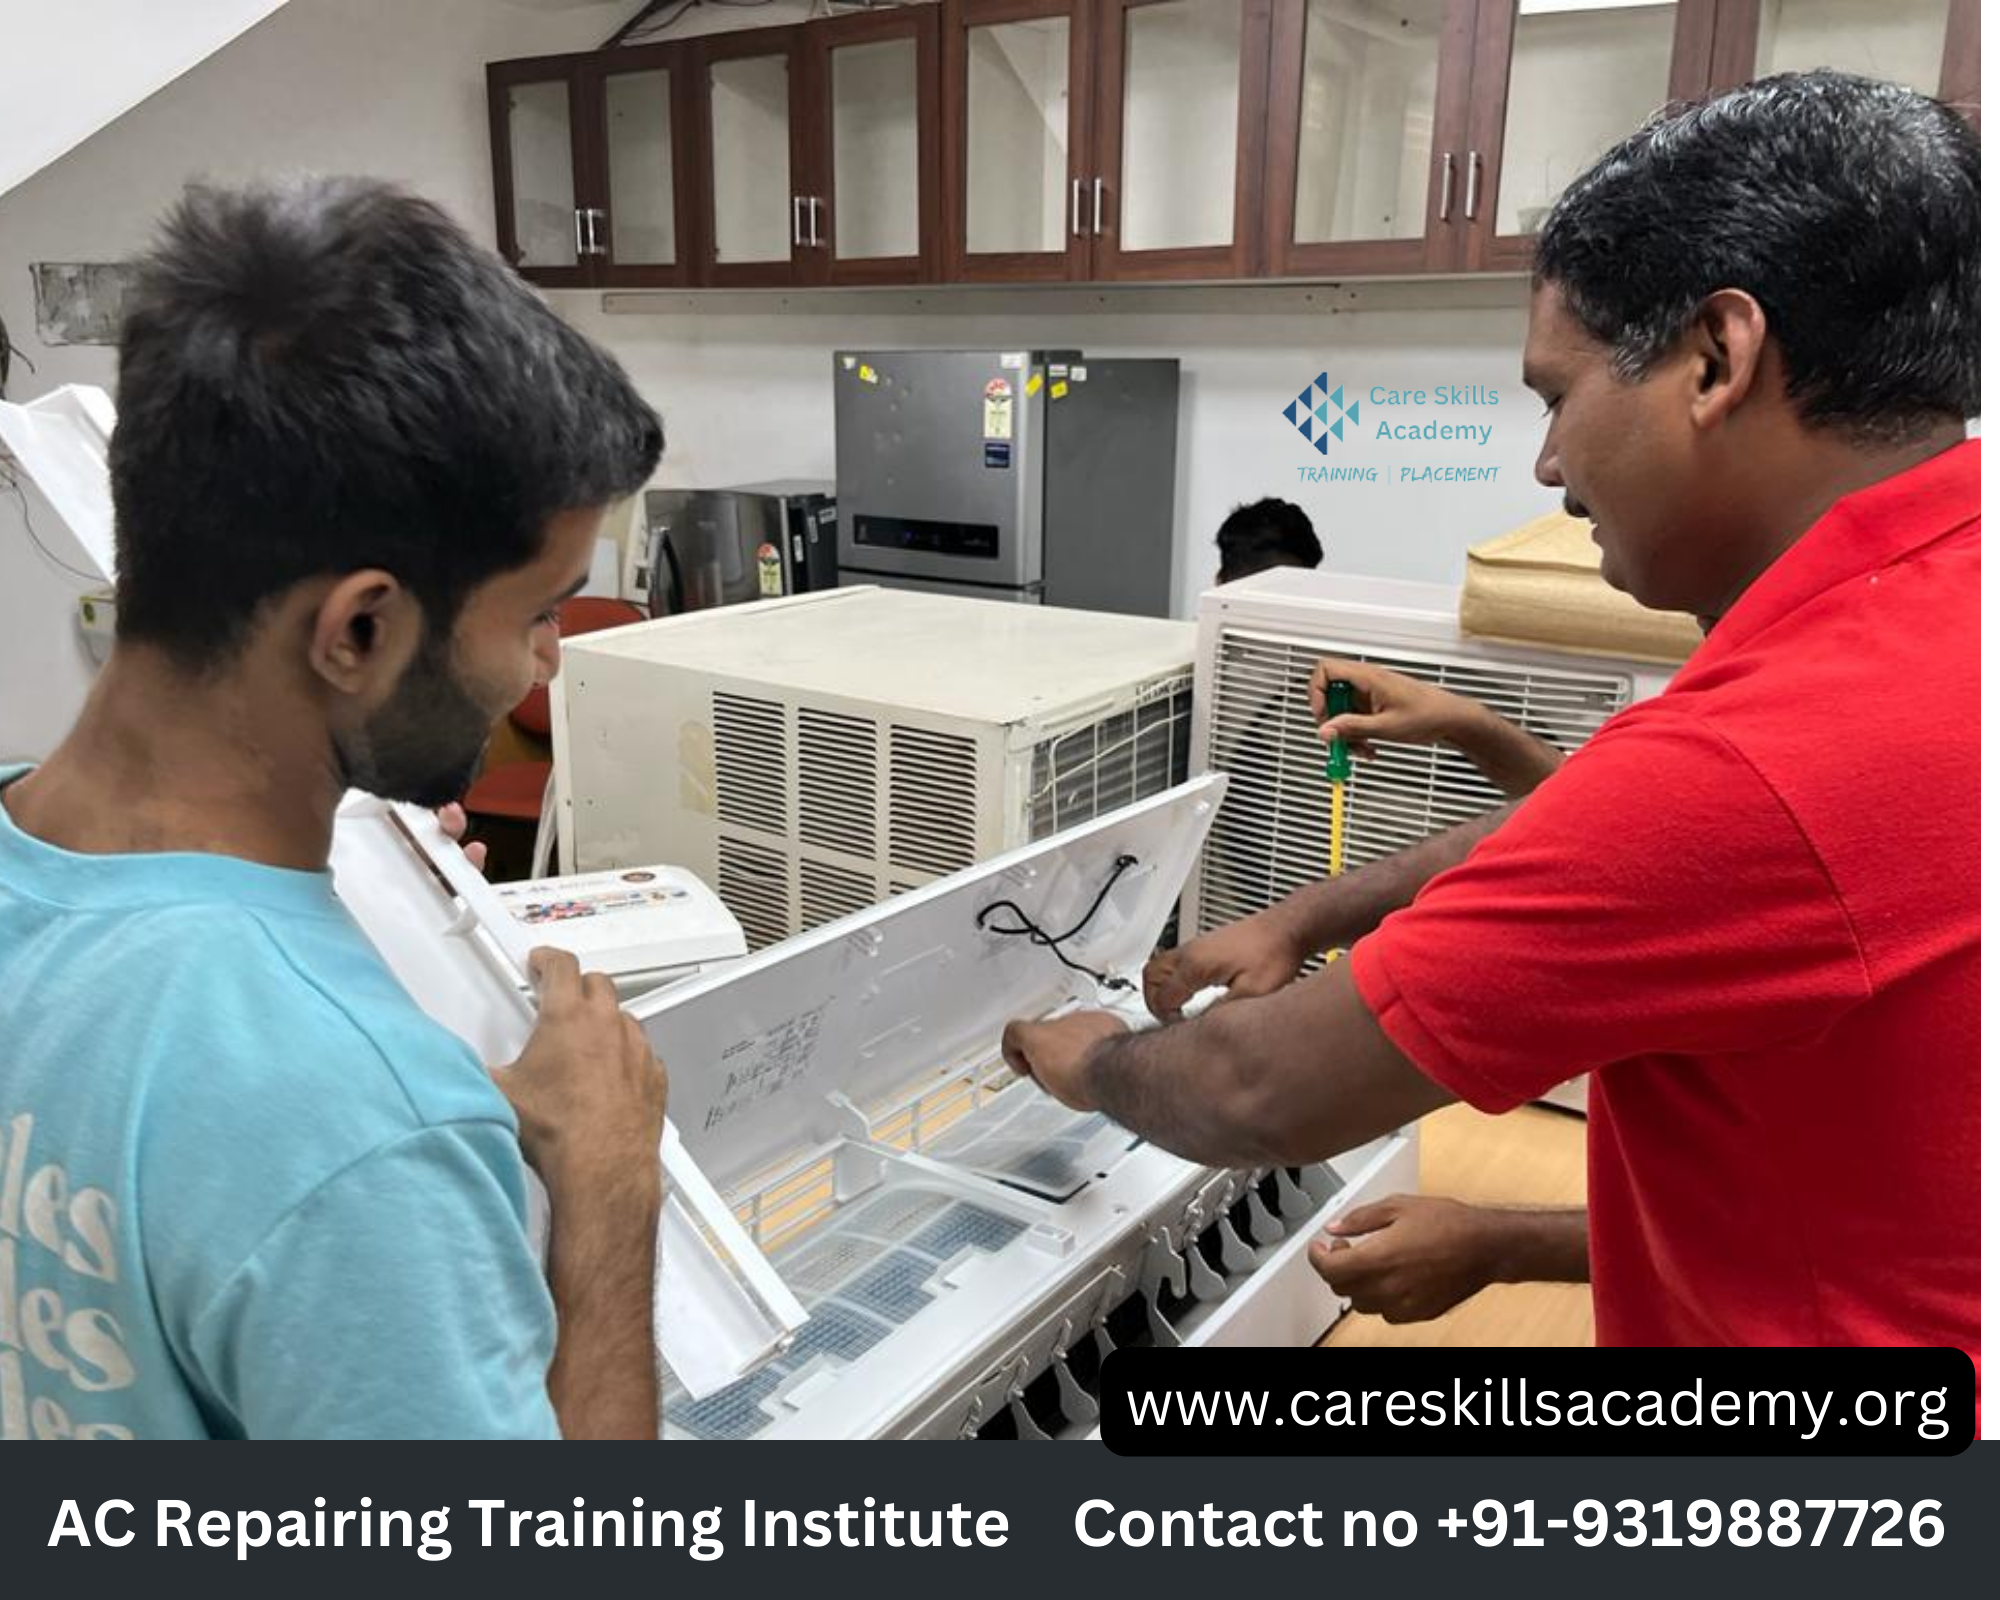 The Top AC Repairing and Technician Course in Delhi